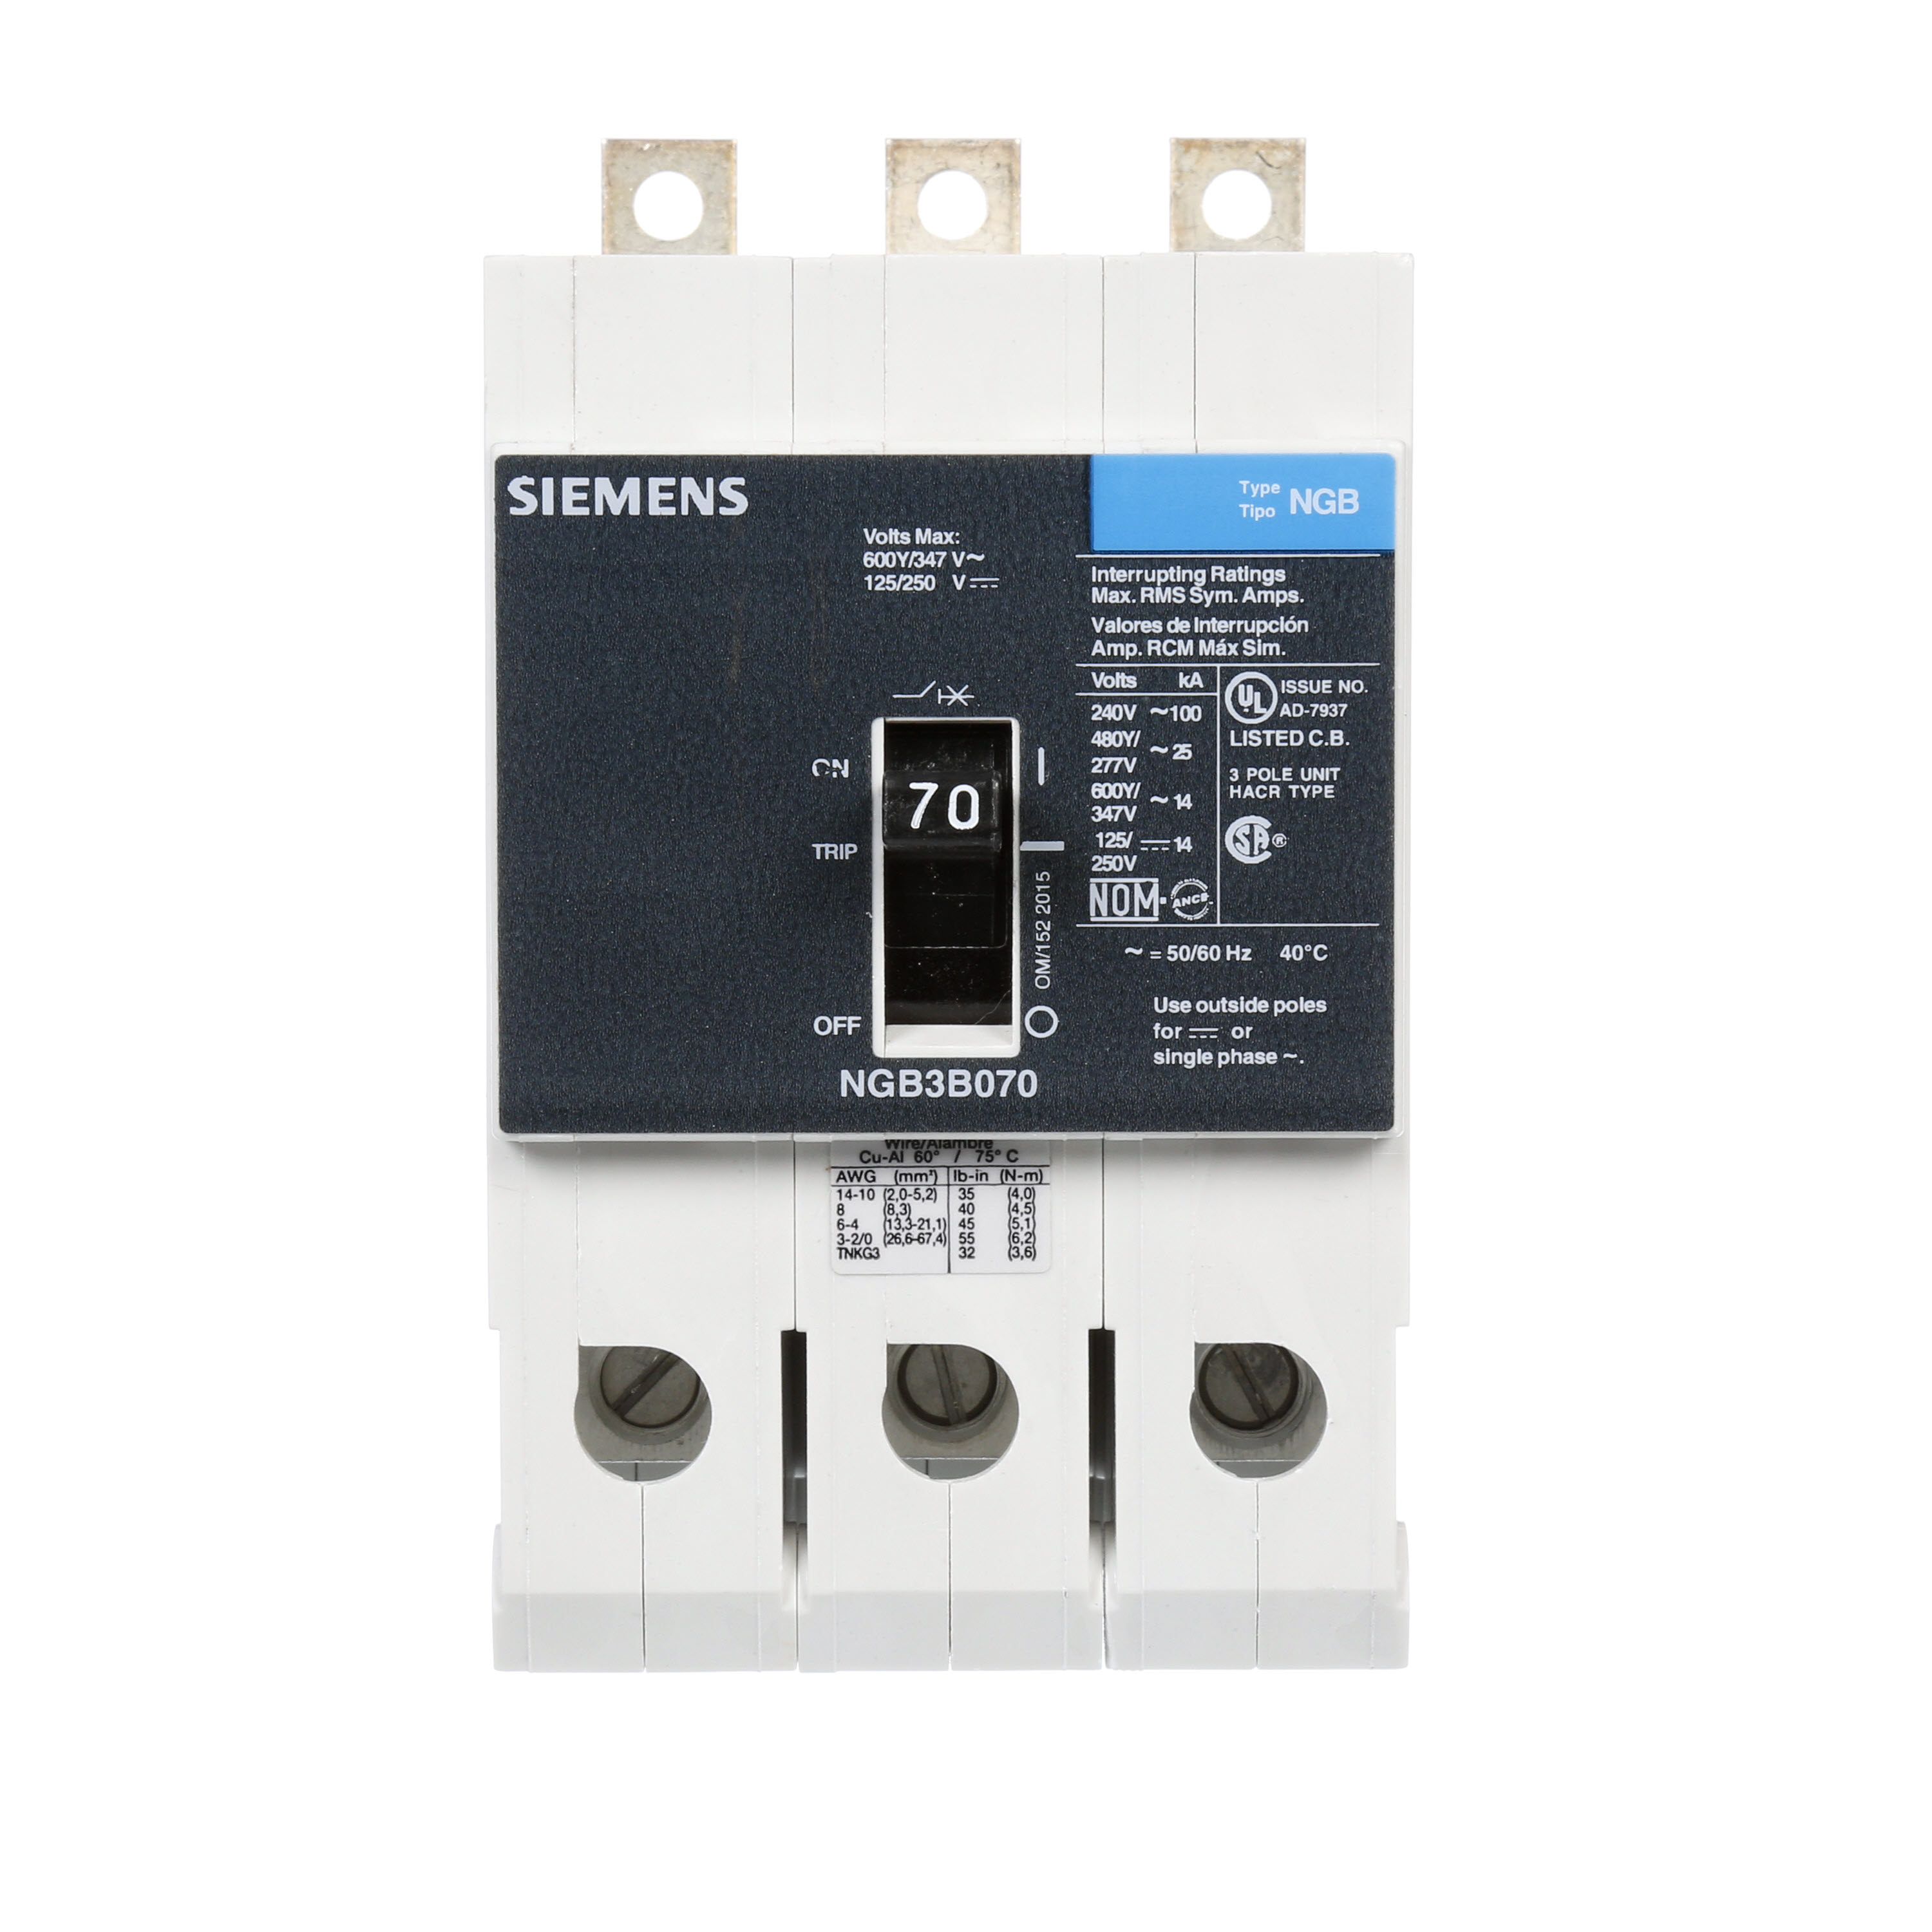 SIEMENS LOW VOLTAGE PANELBOARD MOUNT G FRAME CIRCUIT BREAKER WITH THERMAL - MAGNETIC TRIP. UL LISTED NGB FRAME WITH STANDARD BREAKING CAPACITY. 70A 3-POLE (14KAIC AT 600Y/347V) (25KAIC AT 480Y/277V). SPECIAL FEATURES MOUNTS ON PANELBOARD, NO LUGS, VALUE PACK. DIMENSIONS (W x H x D) IN 3 x 5.4 x 2.8.